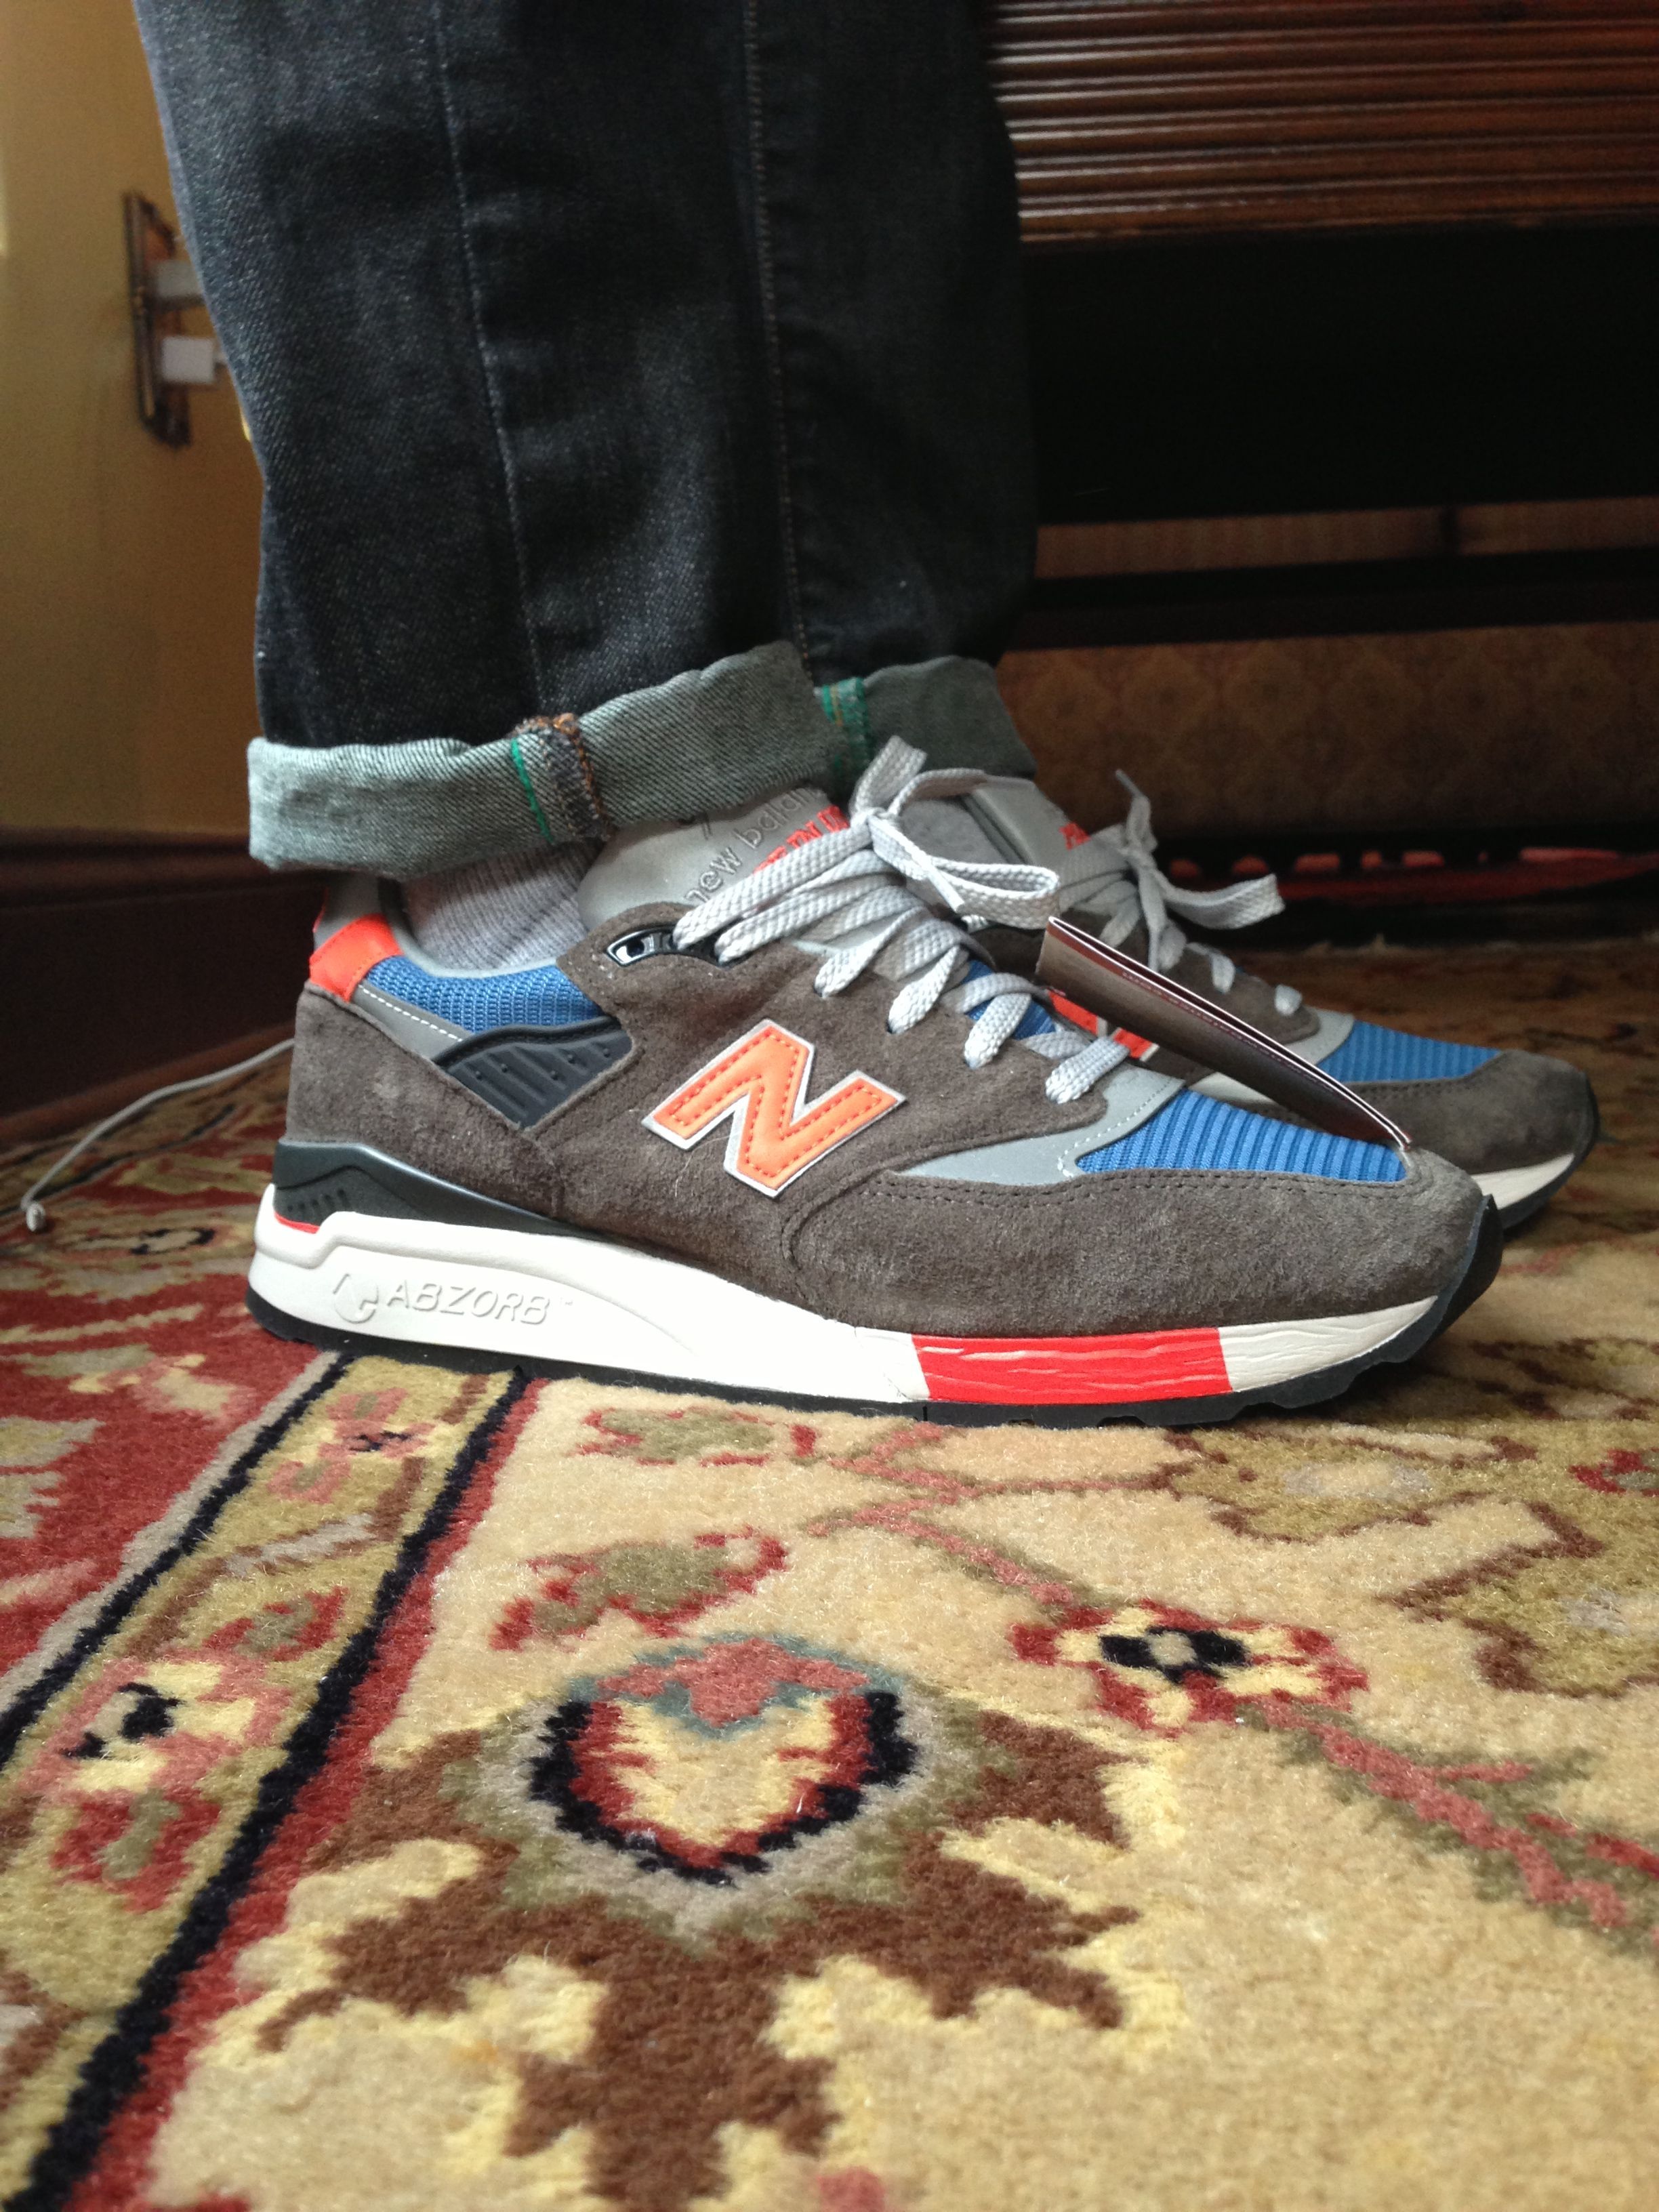 can New Balance runners and jeans look good?? | Page 4 | Styleforum